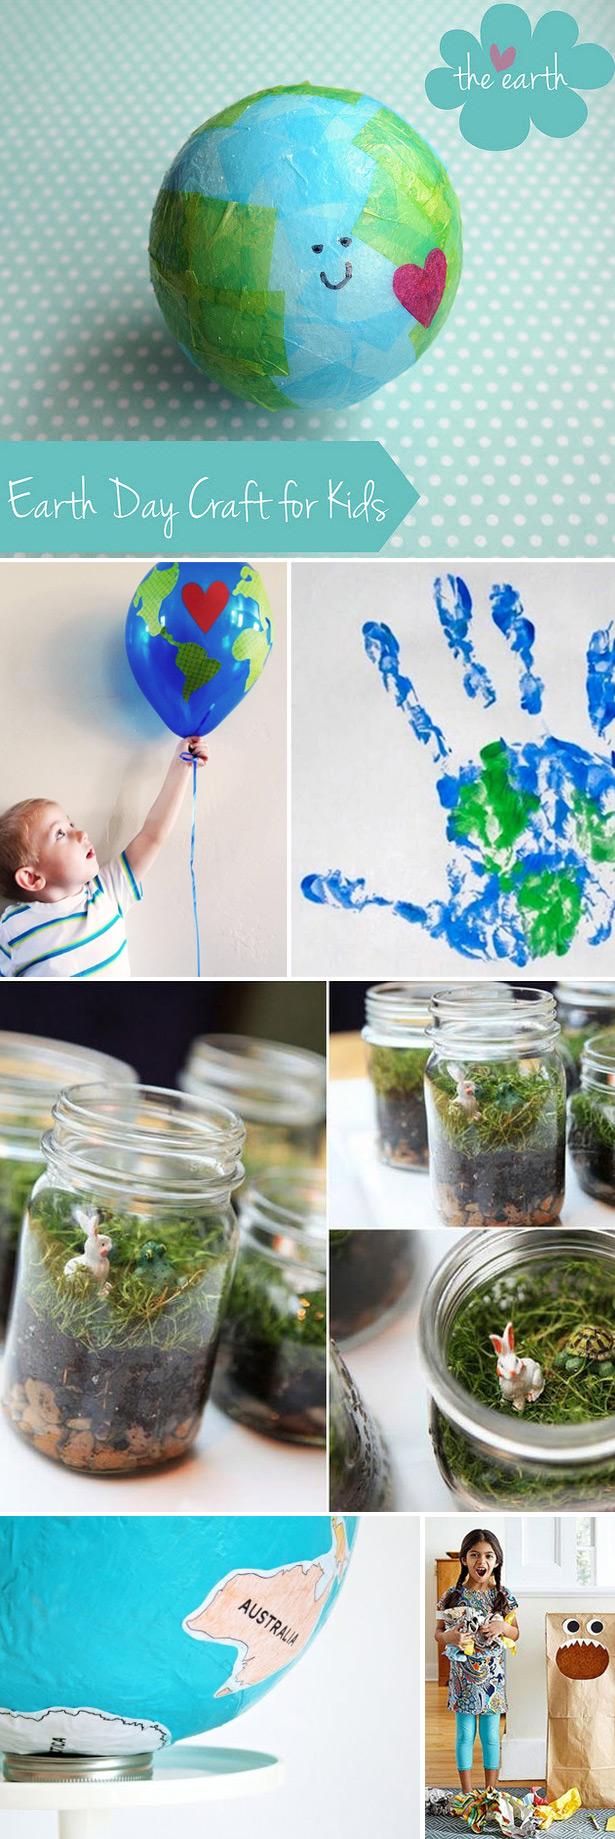 Earth day kid crafts